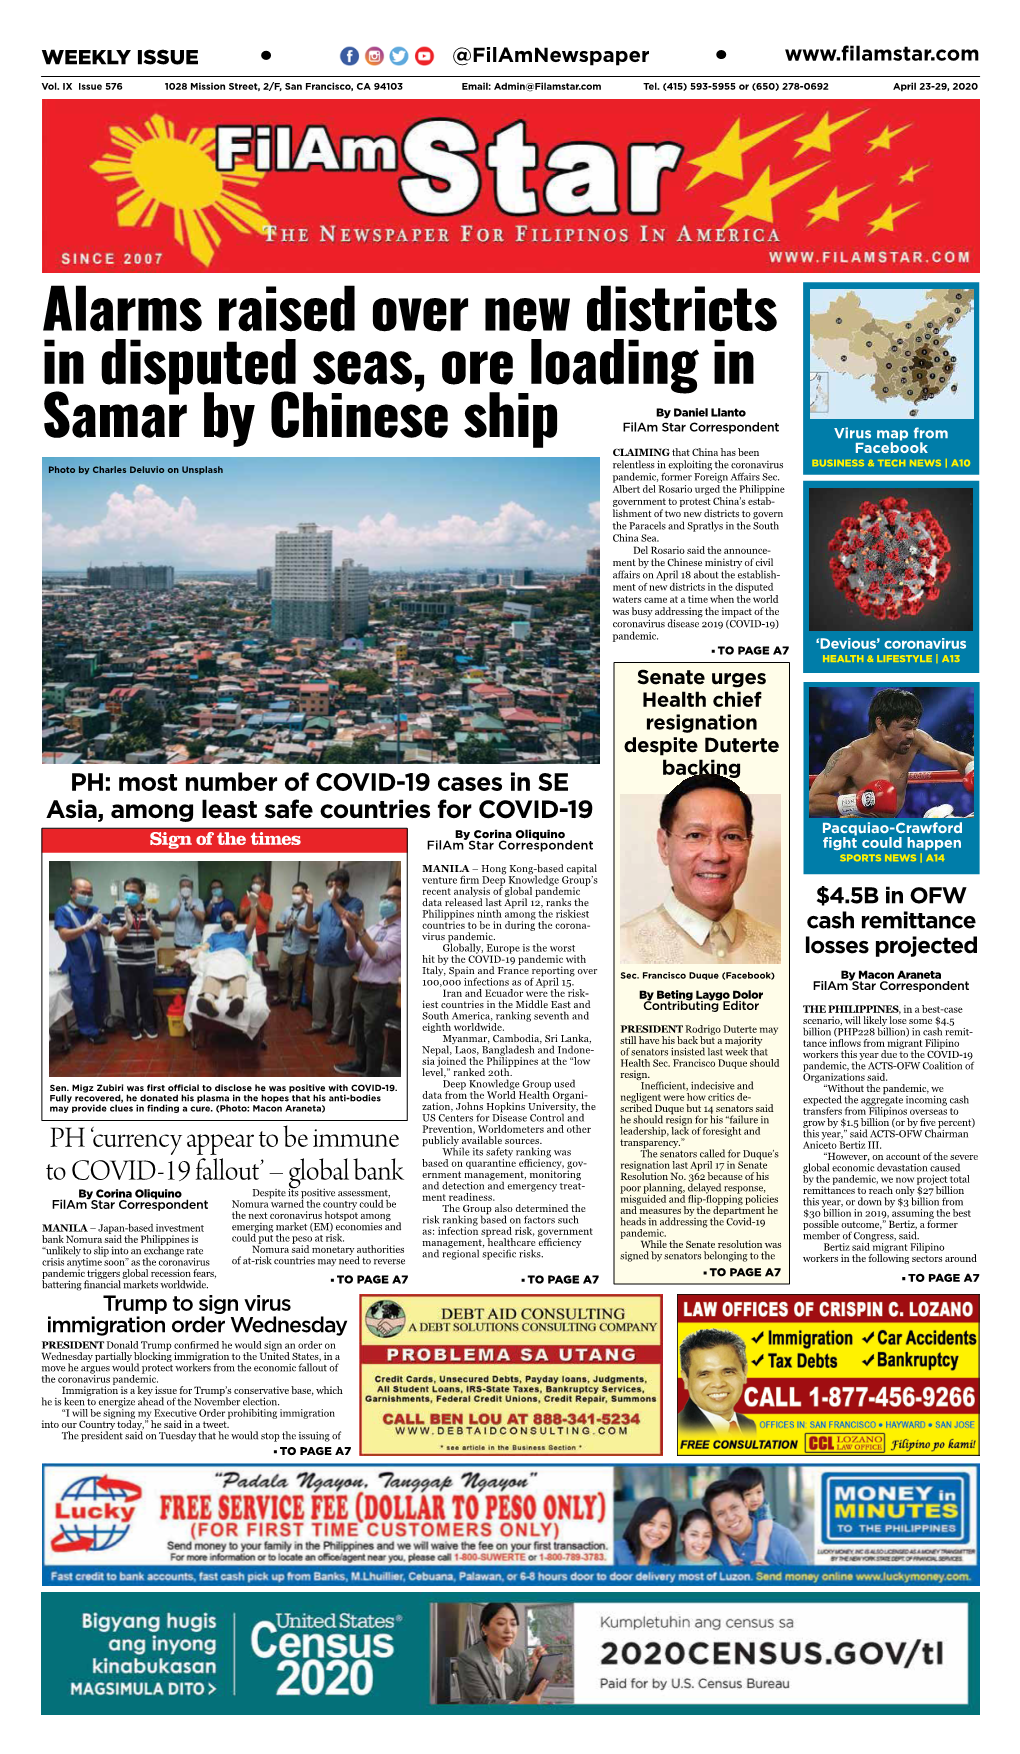 Alarms Raised Over New Districts in Disputed Seas, Ore Loading in Samar by Chinese Ship